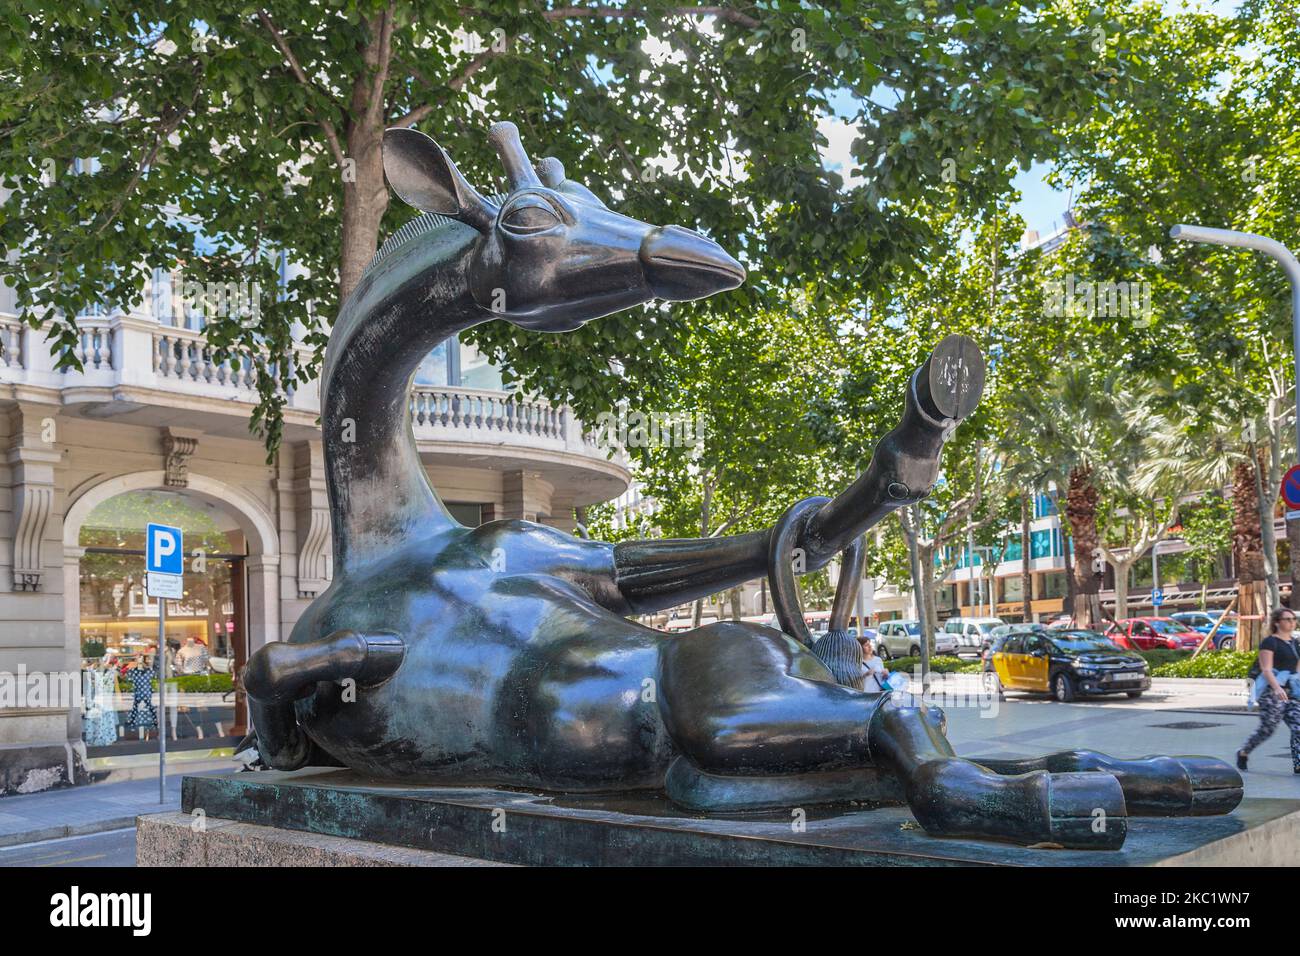 BARSELONA, SPAIN - MAY 12, 2017: Sculpture Resting Giraffe is a figure of a giraffe lying in a resting flirtatious pose on the boulevard in the center Stock Photo